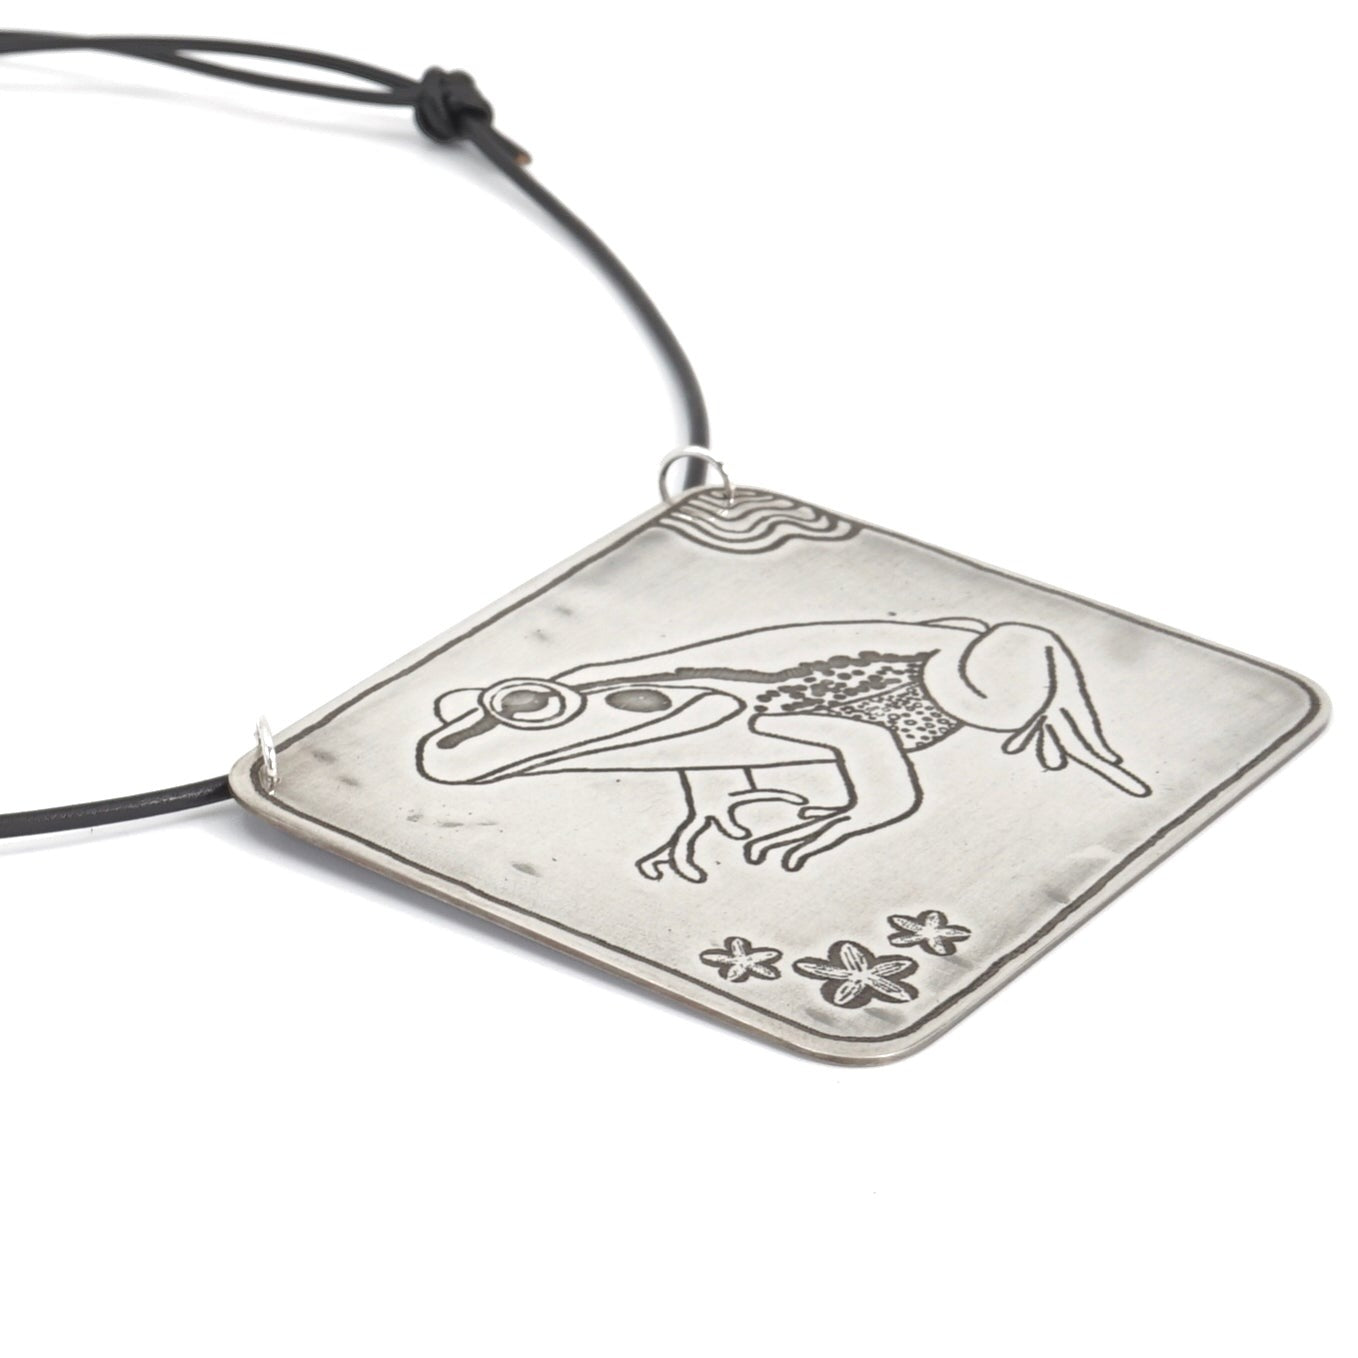 Growling Grass Frog Etched Sterling Silver Necklace on Adjustable Black Leather